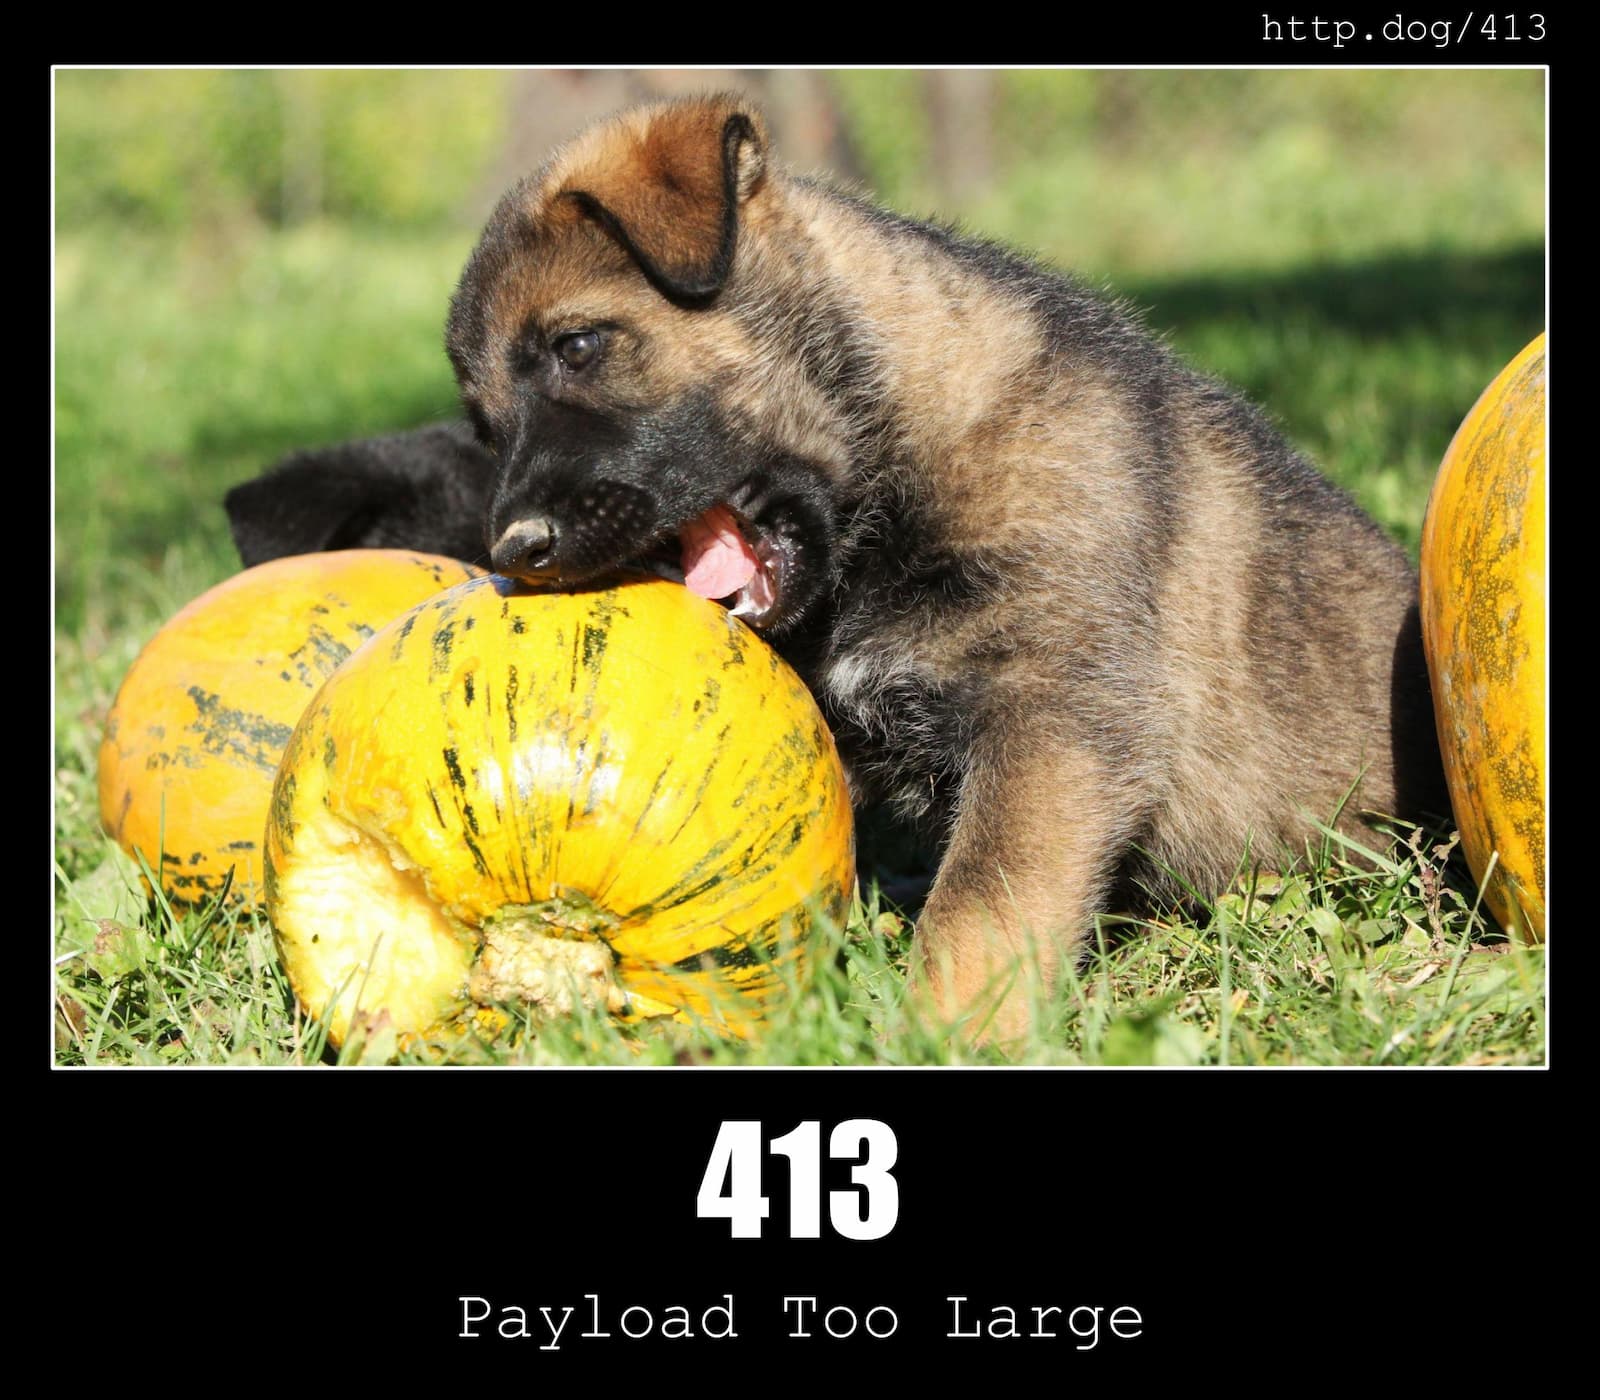 A puppy fails to take a bite out of a way too big fruit, with the text 413 Payload Too Large.